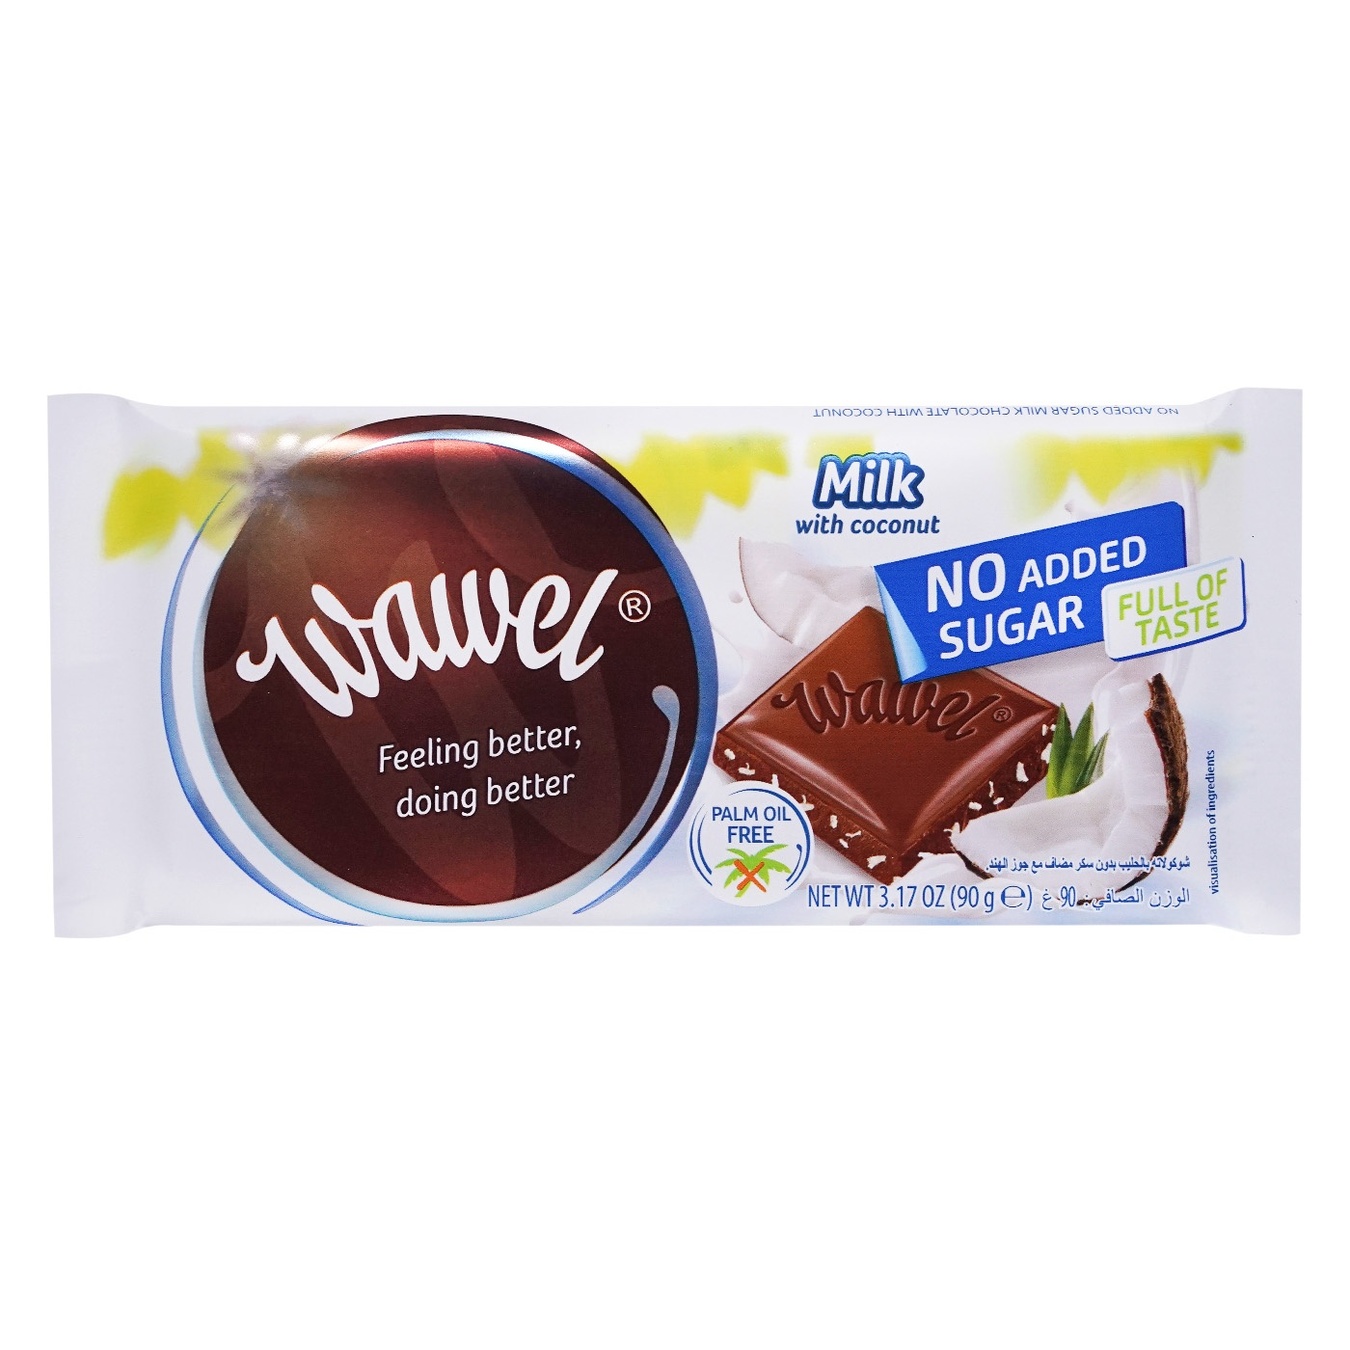 WAWEL milk chocolate with coconut without added sugar 90g